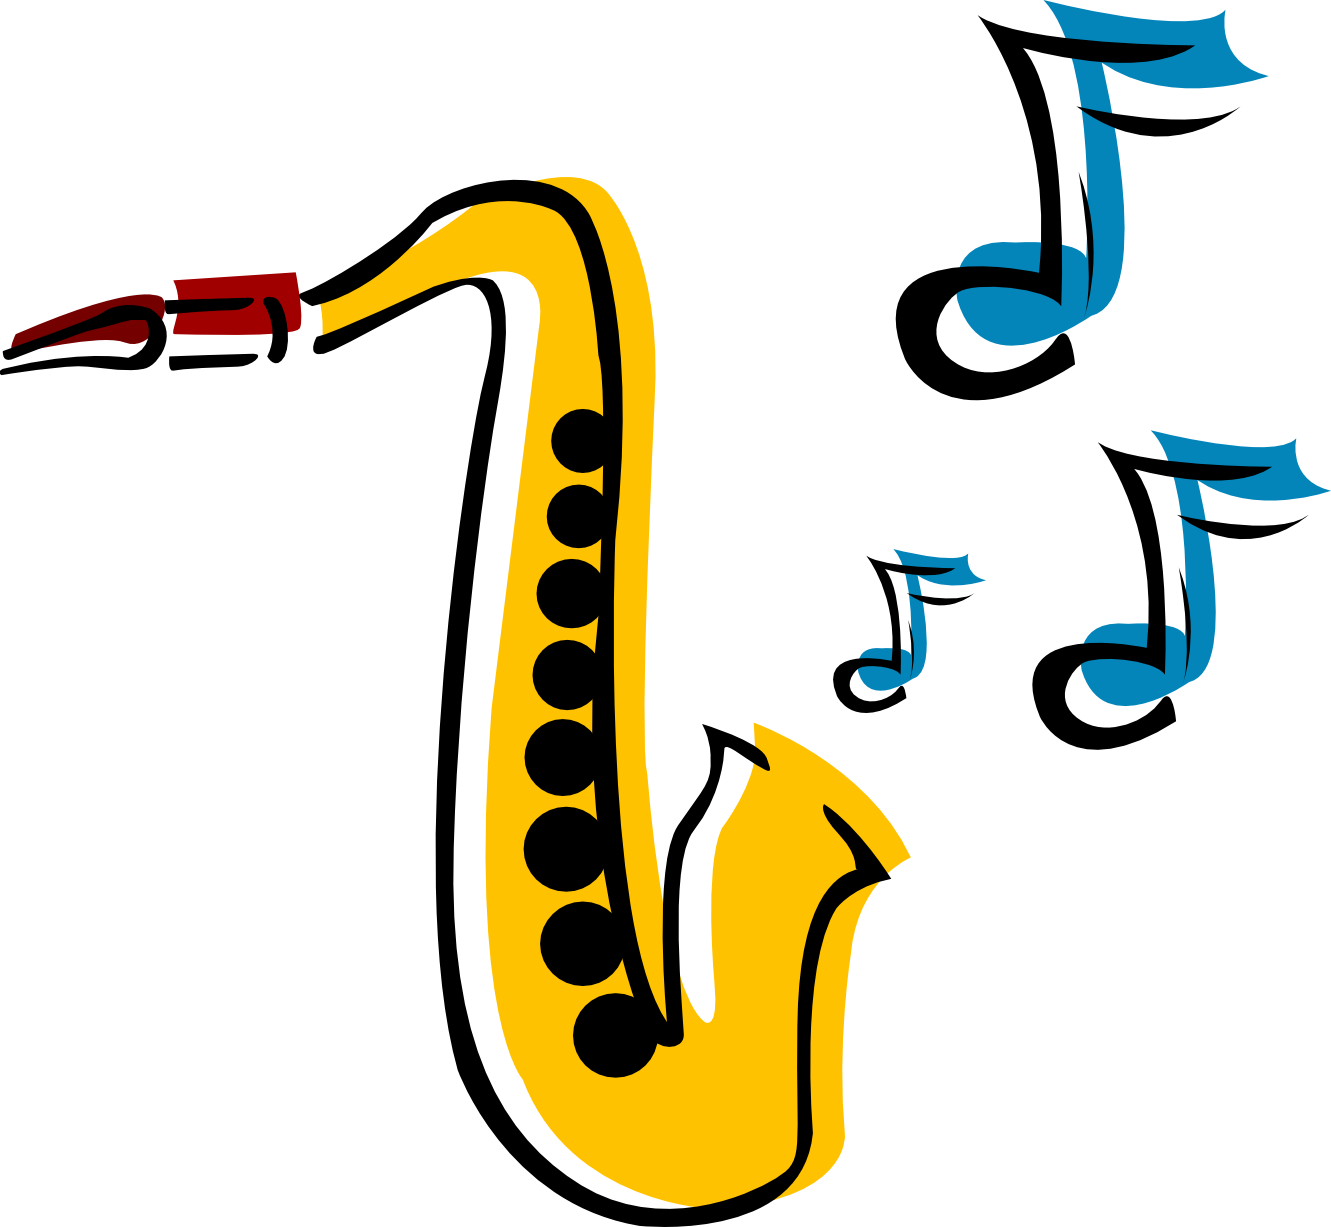 Sax 20clipart - Free Clipart Images